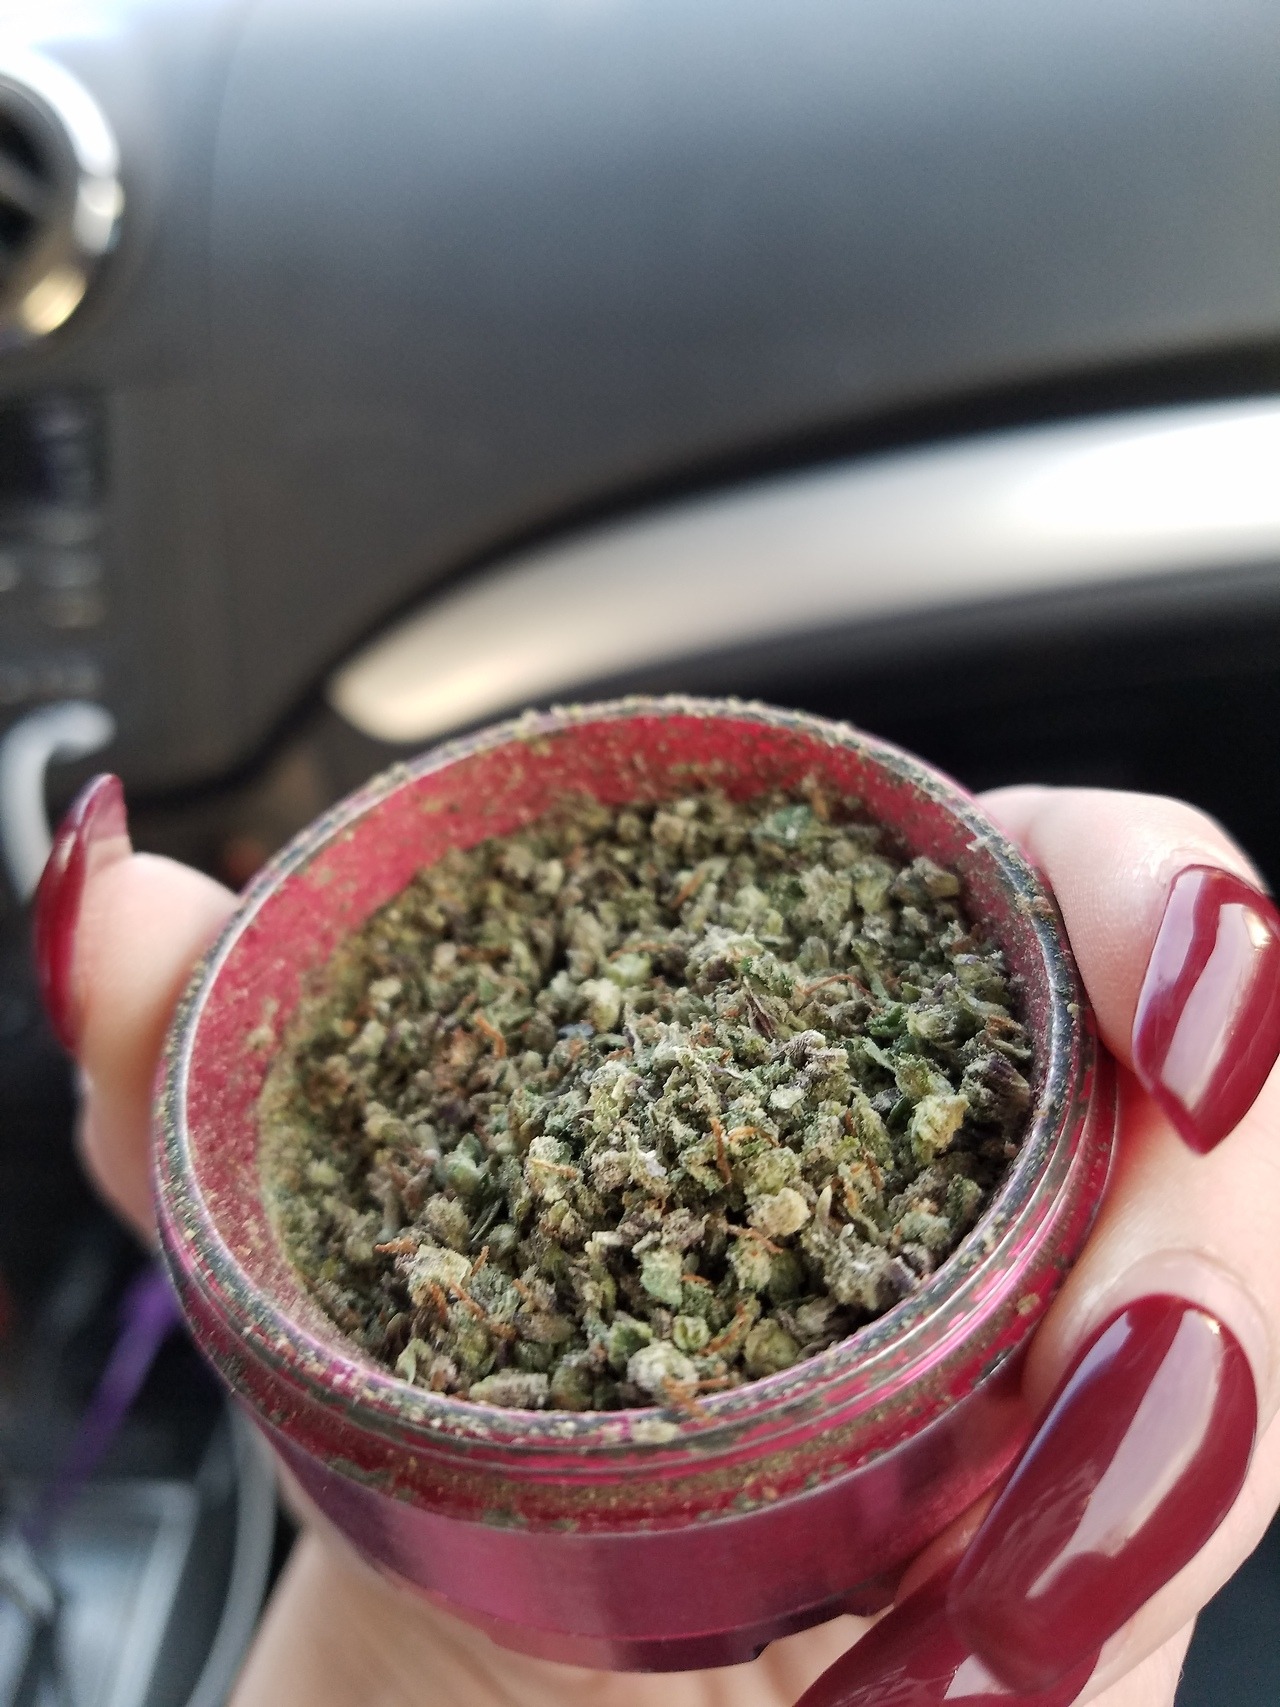 indica-illusions:  indica-illusions:  Ahh how I love grinding up bud and watching